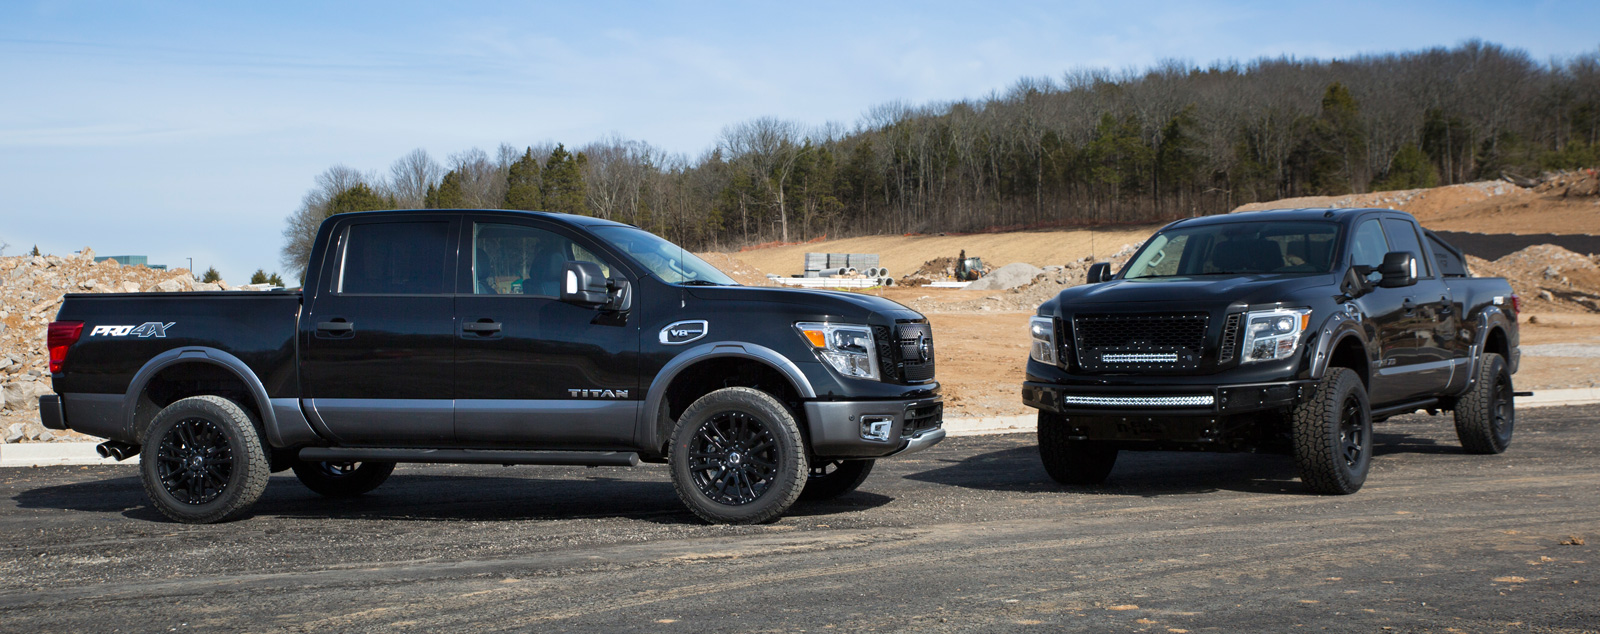 2017 Nissan Titan XD Gets Ready for Off-Road Fun » AutoGuide.com News